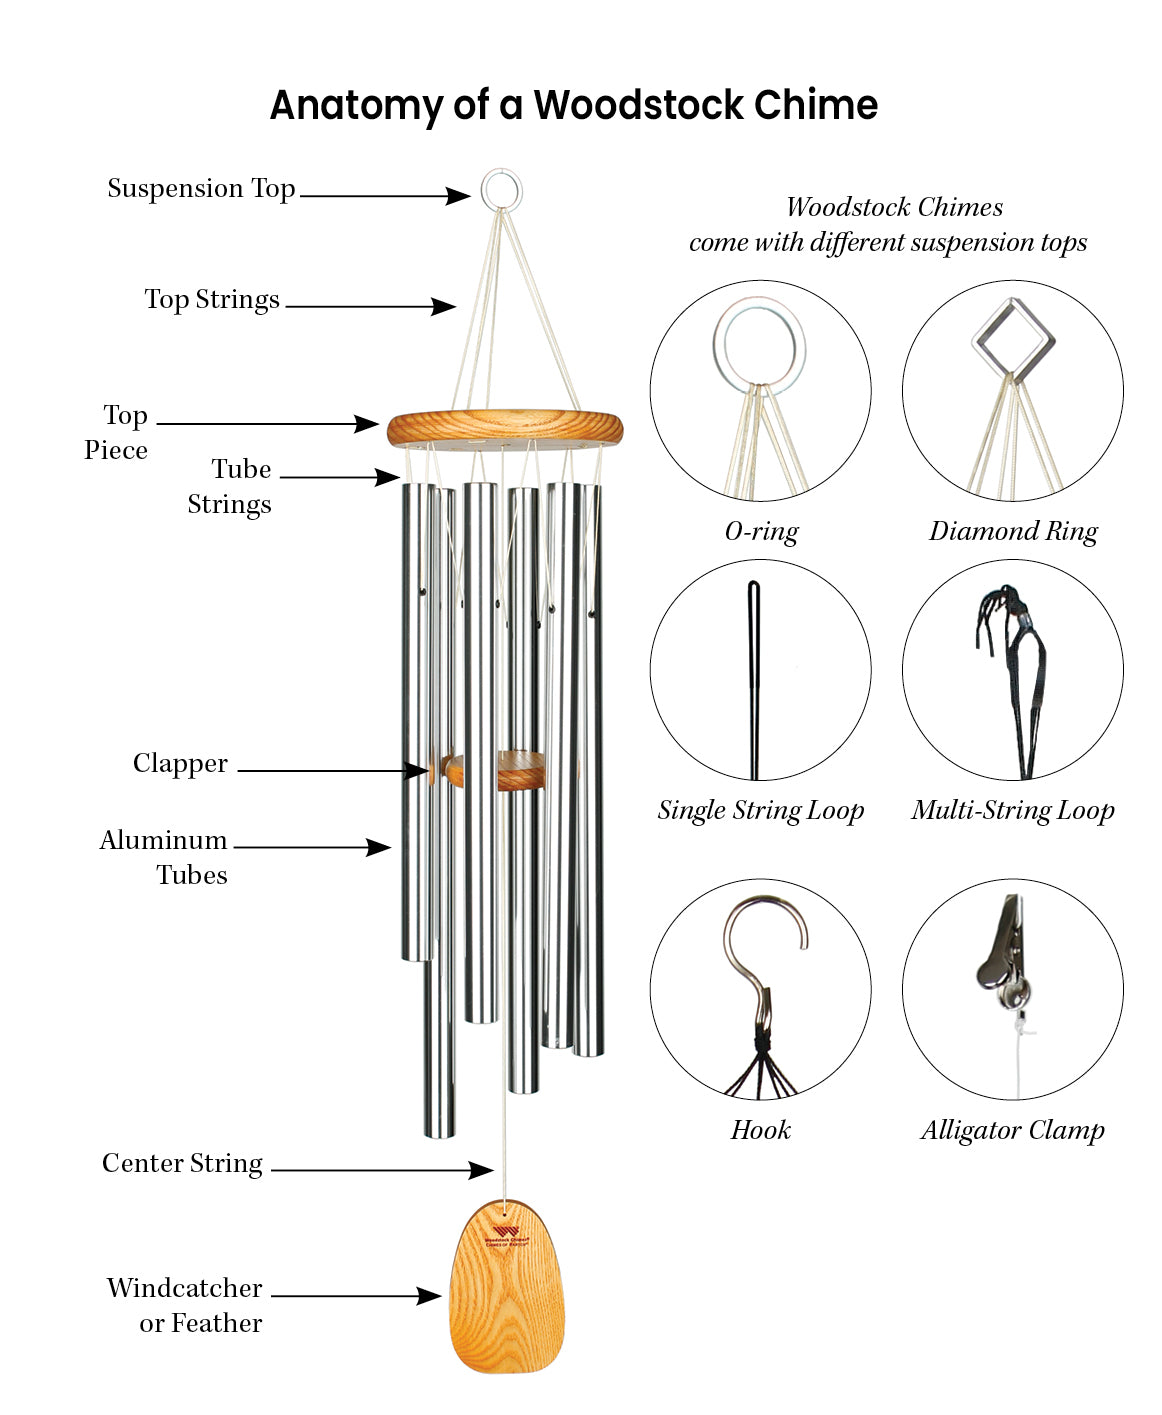 Anatomy of the Chime – Woodstock Chimes